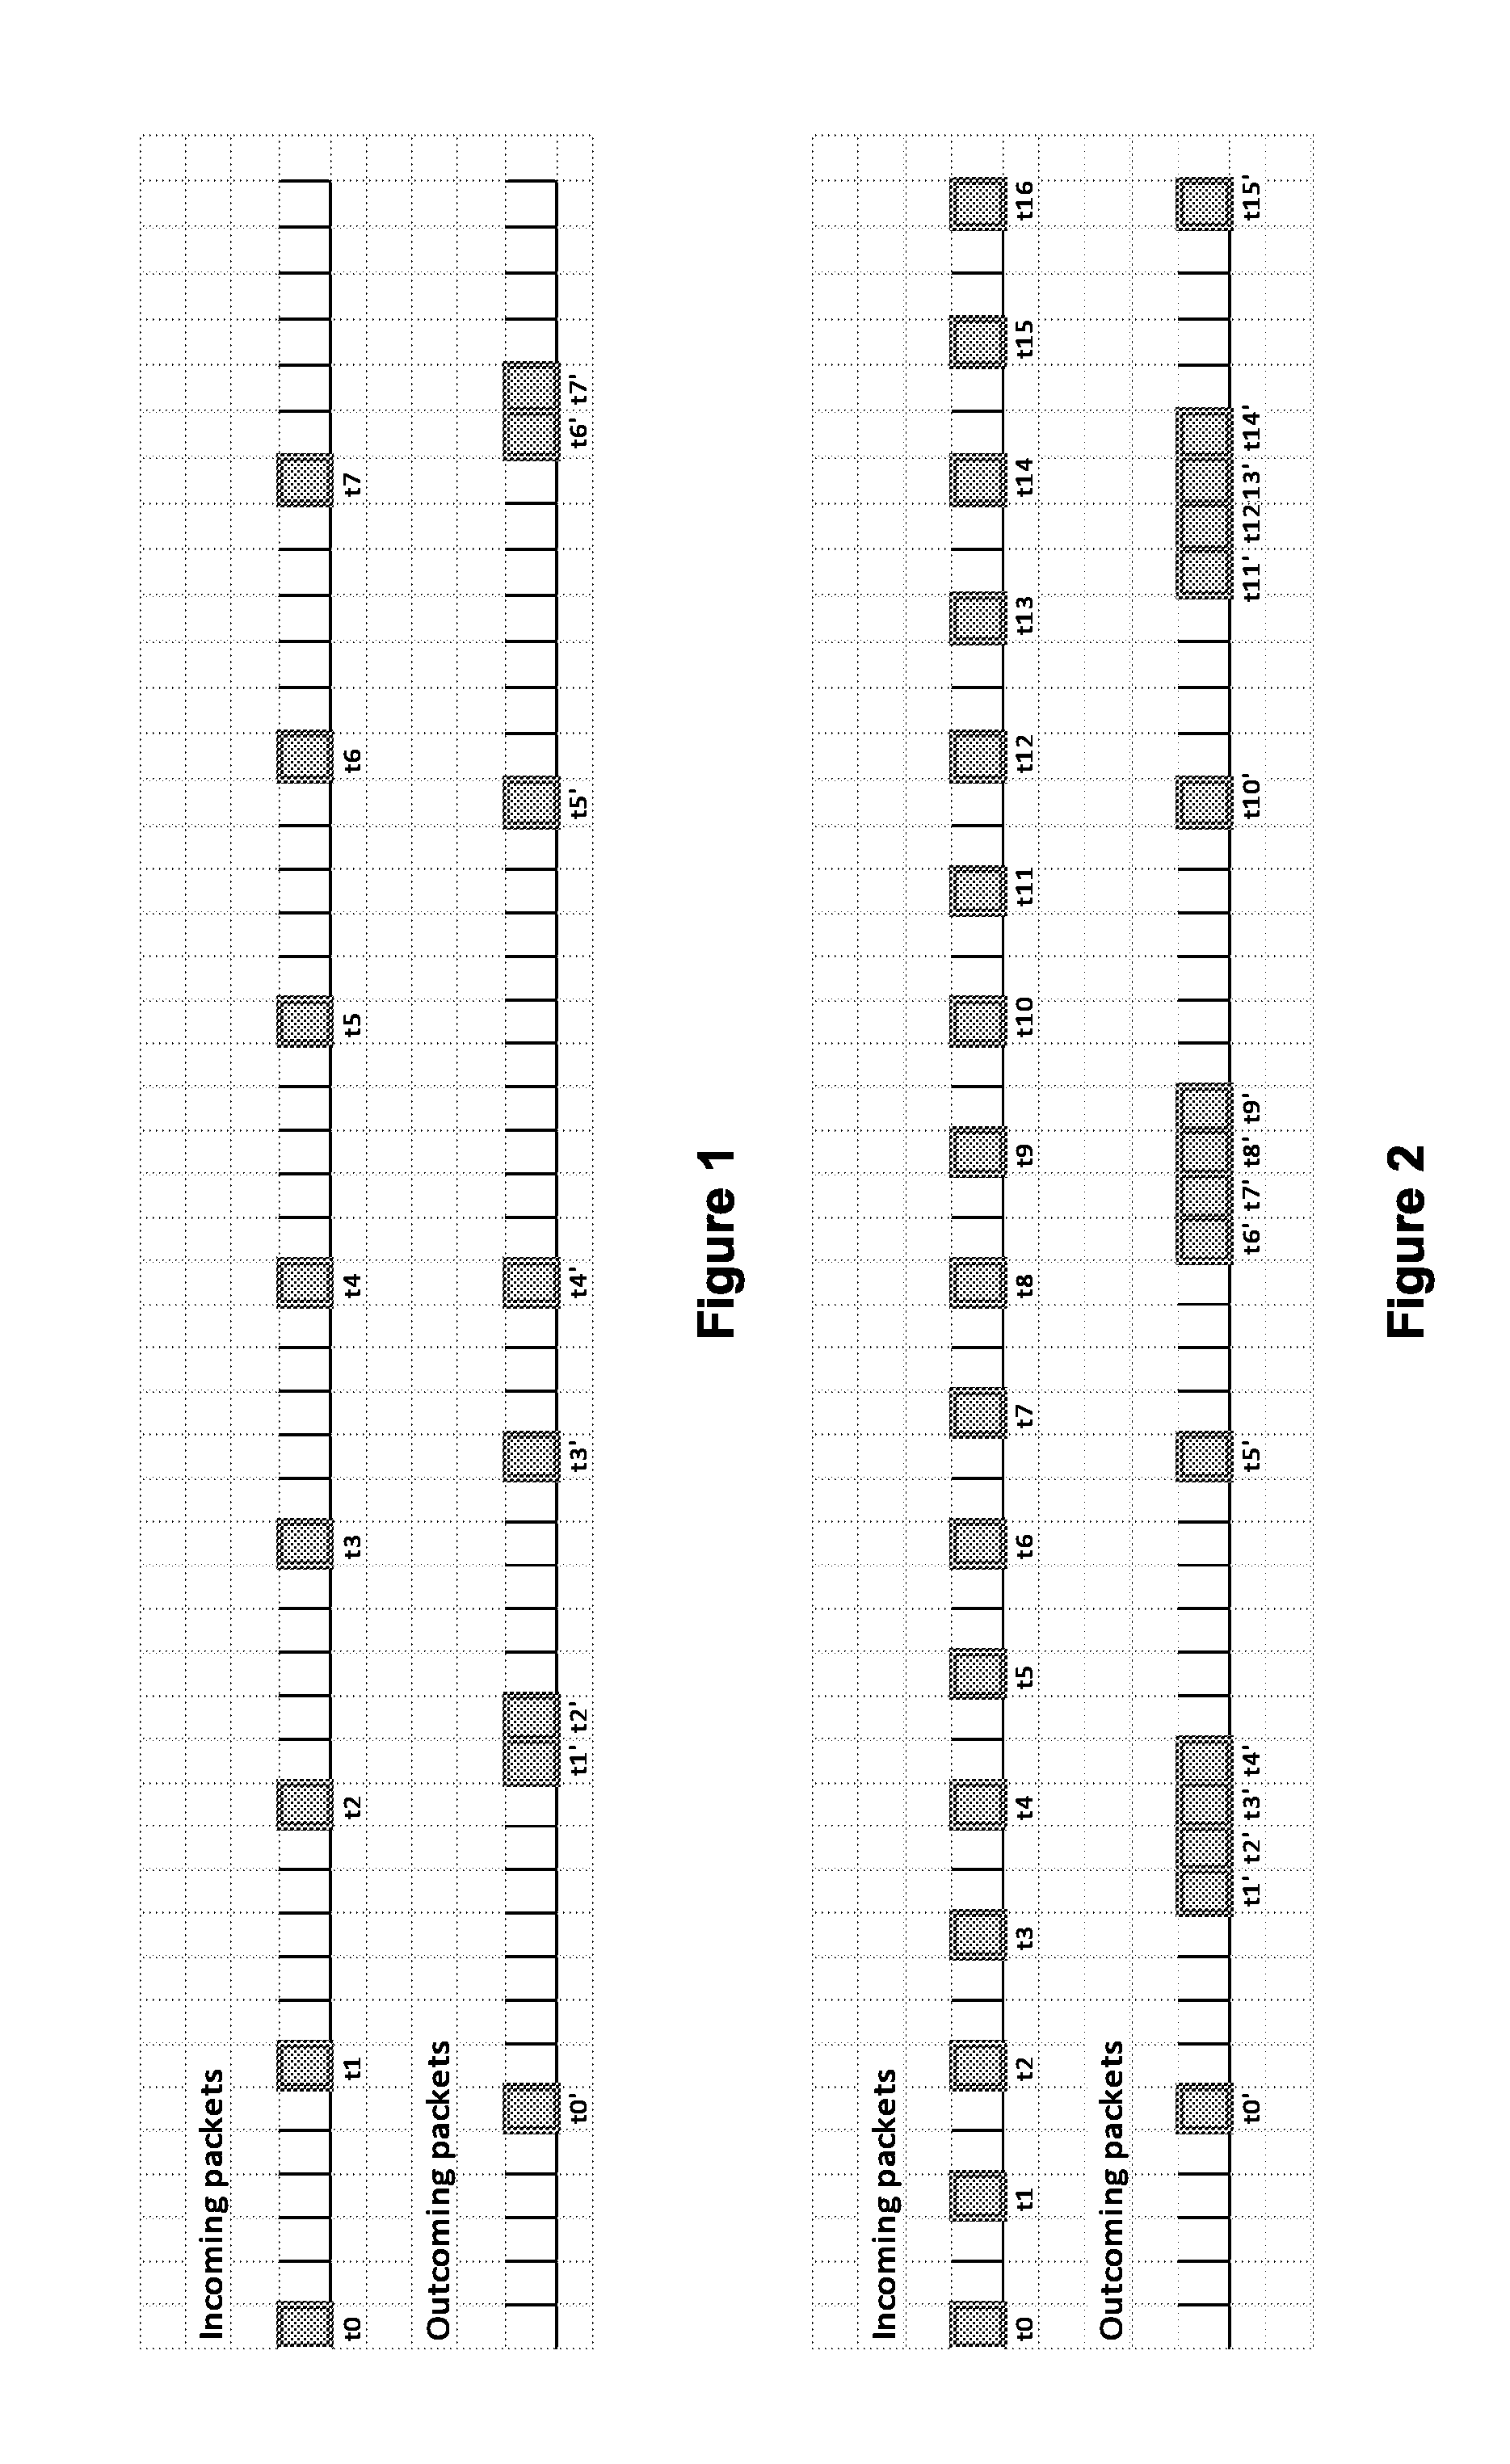 Packet Delay Variation in a Packet Switched Network